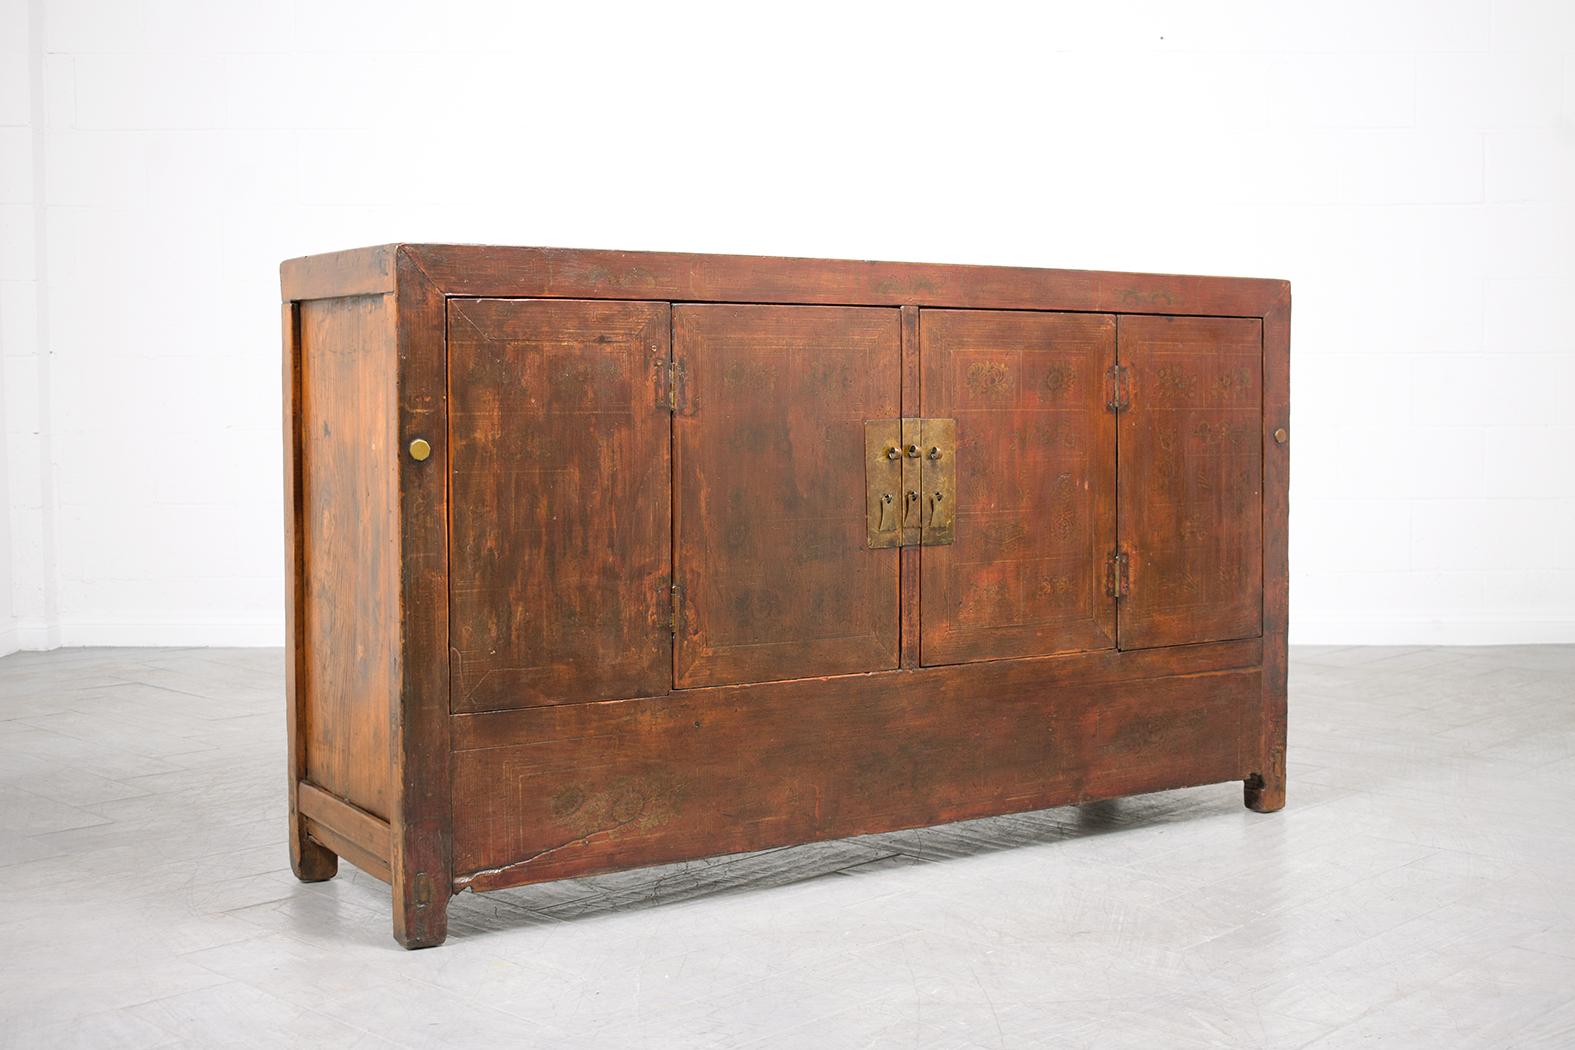 1980s Vintage Chinese Elm Wood Sideboard: Hand-Painted Floral & Brass Accents For Sale 7